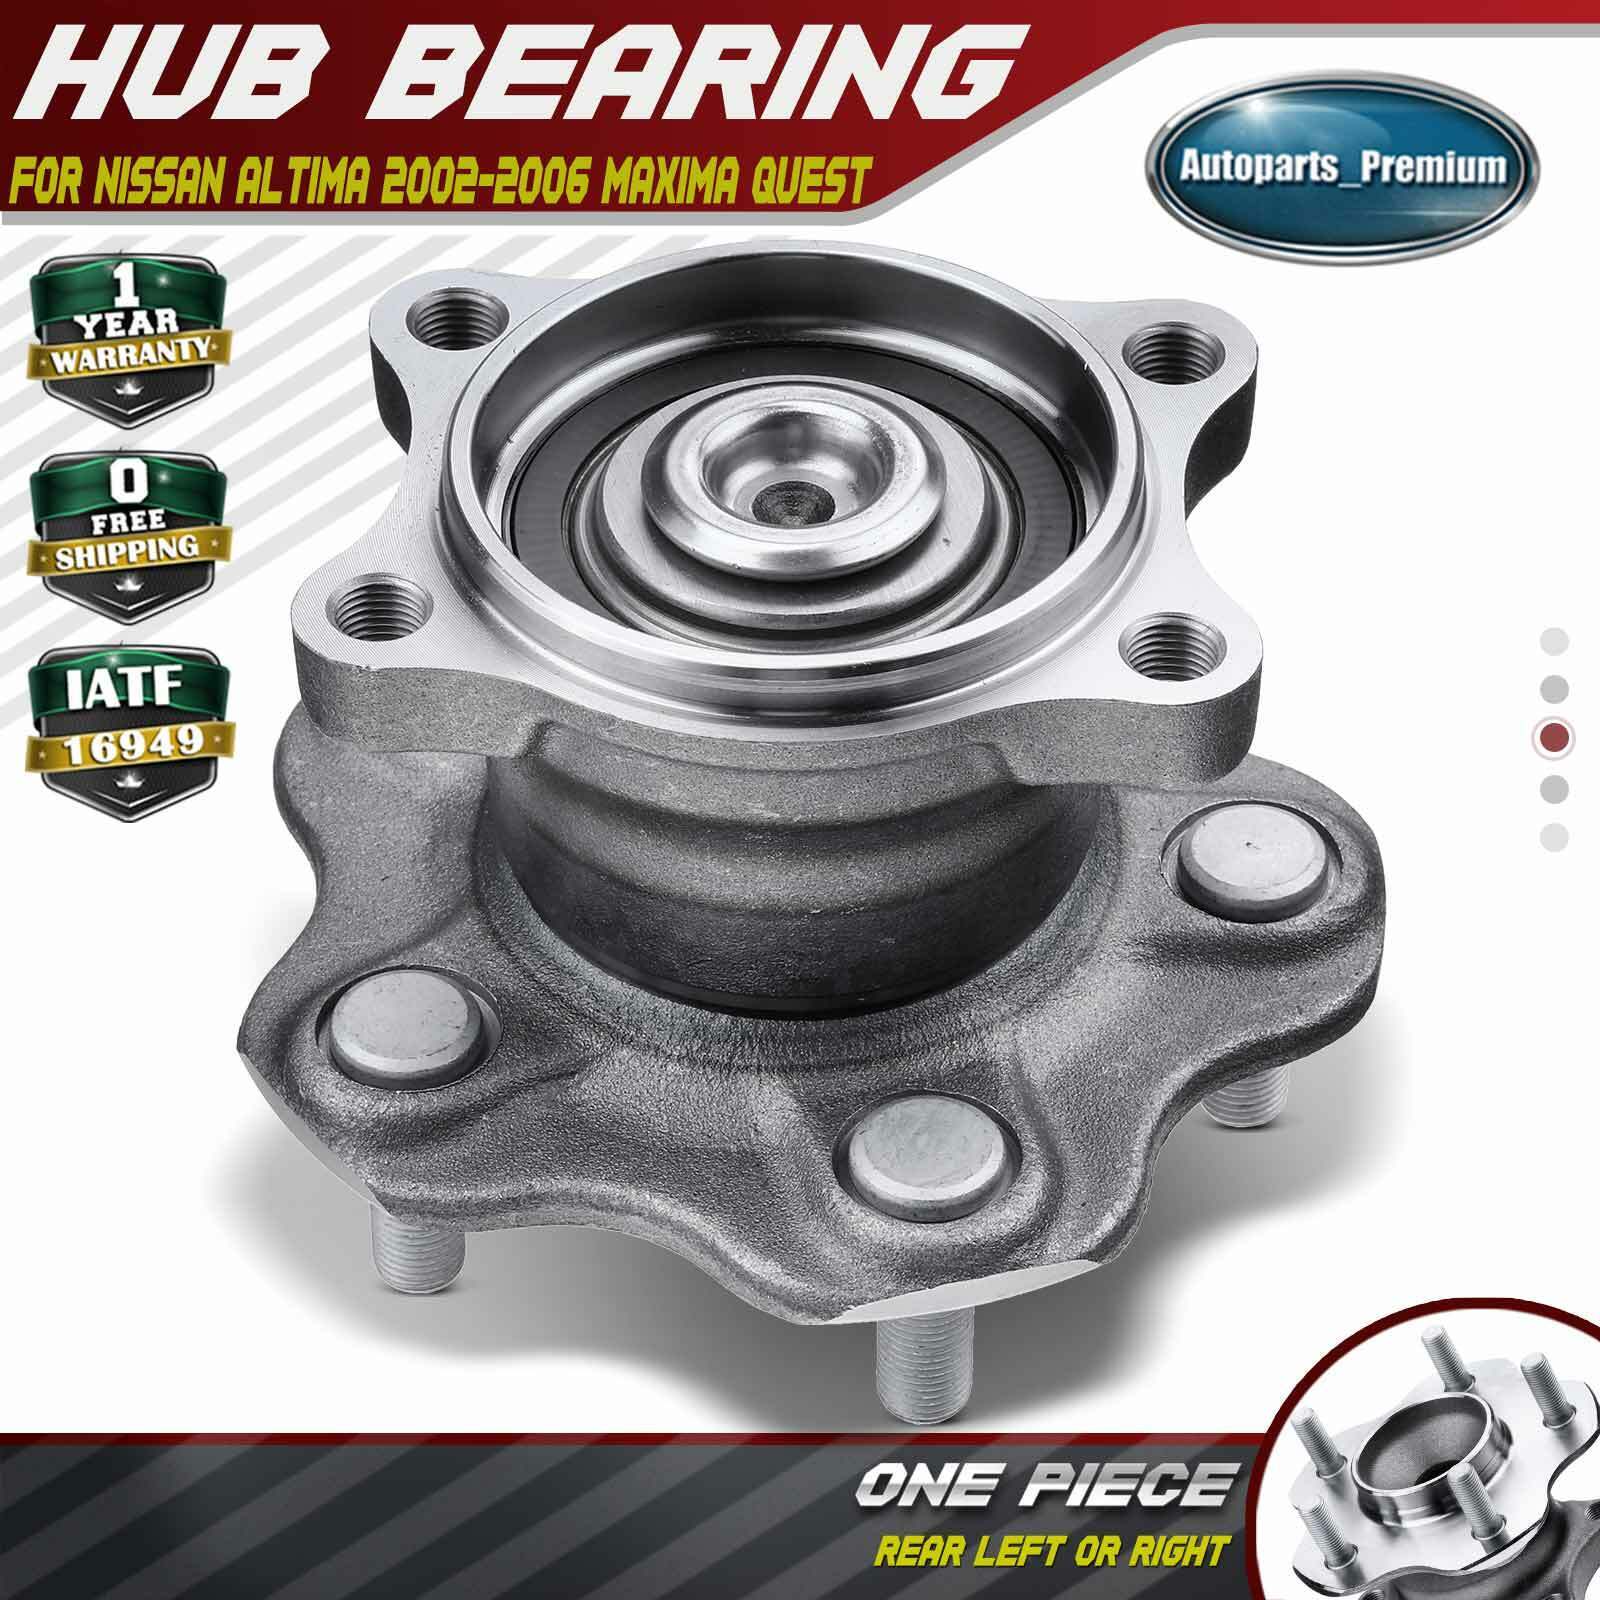 Rear LH / RH Wheel Bearing Hub Assembly for Nissan Altima 2002-2006 Maxima Quest